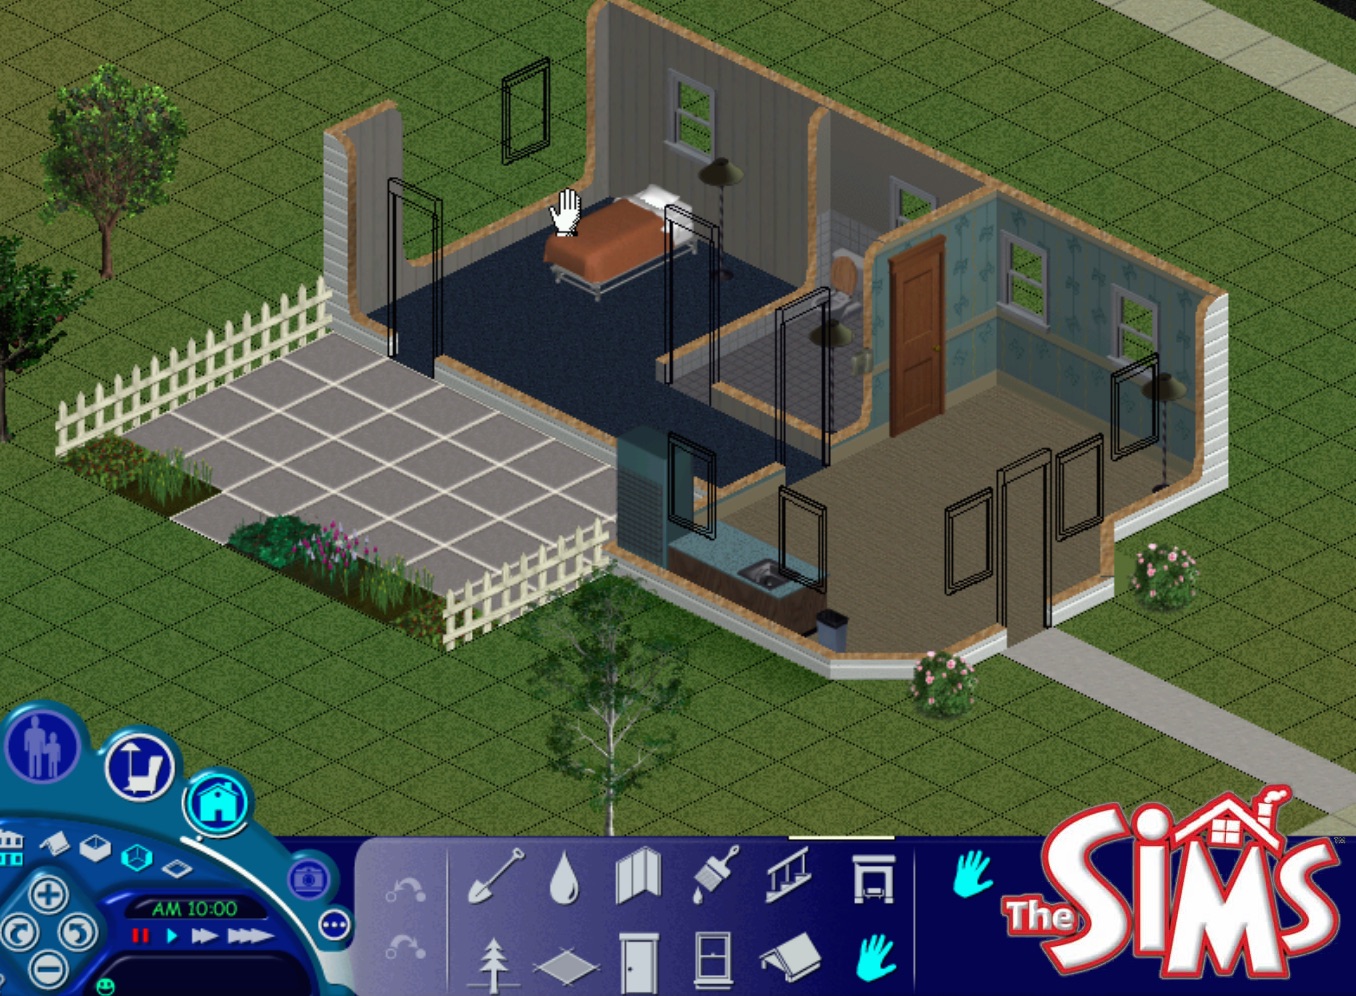 Sims 1 русский. The SIMS 1. SIMS 6. Симс 1-4. Симс 1 Скриншоты.